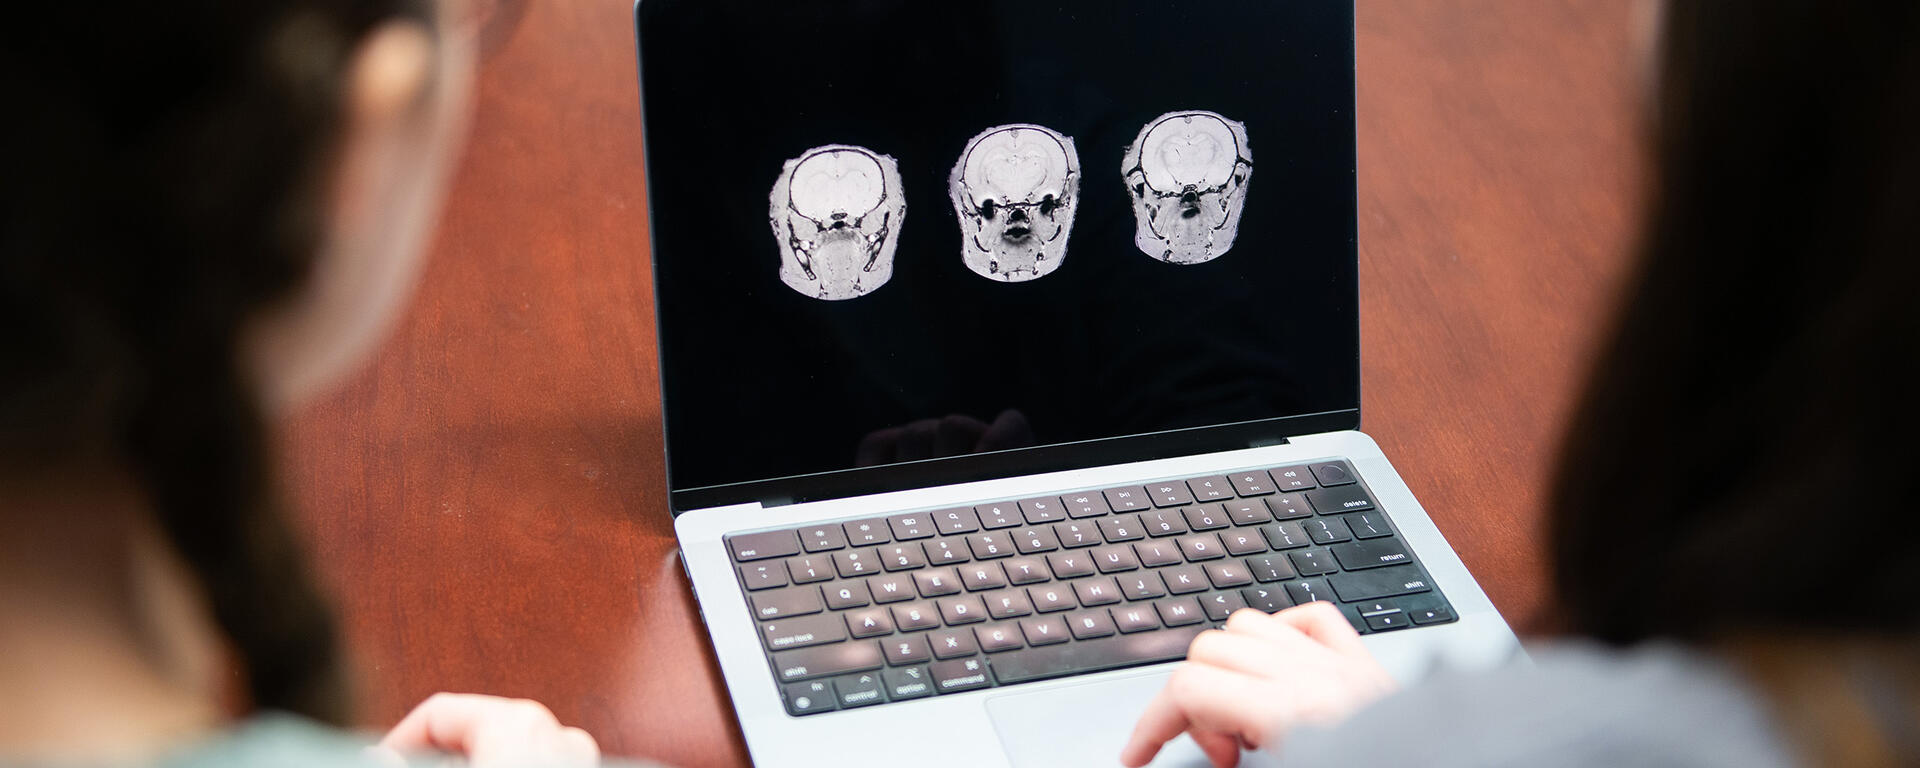 Three rodent brain MRI images are displayed horizontally on a laptop screen, which is being viewed by two women.